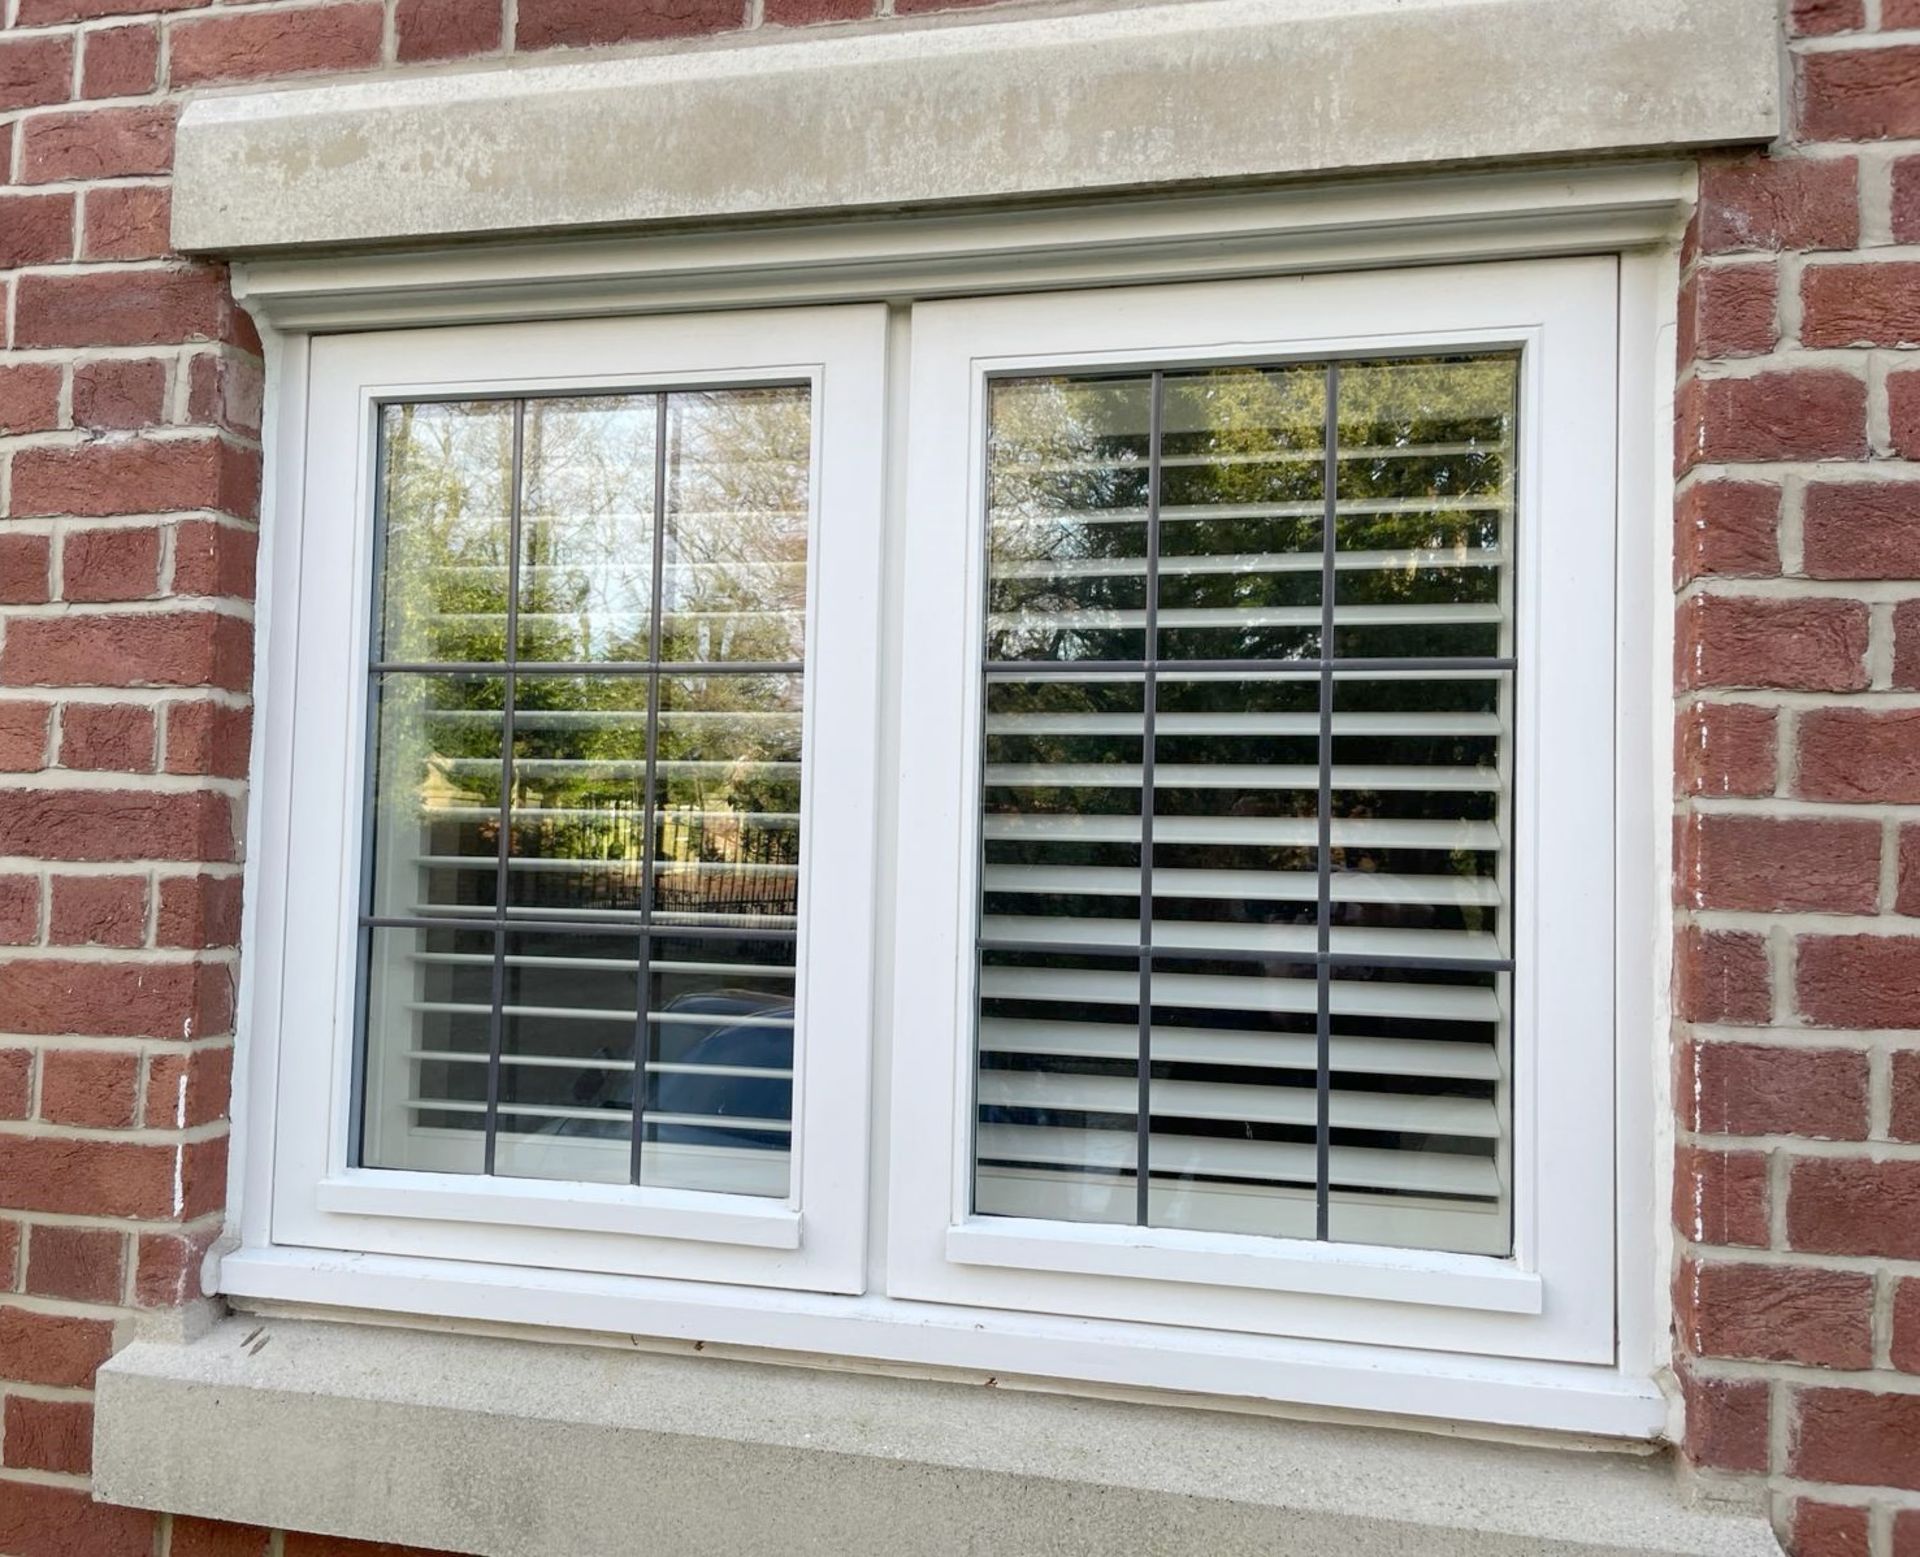 1 x Hardwood Timber Double Glazed Leaded 2-Pane Window Frame fitted with Shutter Blinds - Image 2 of 12